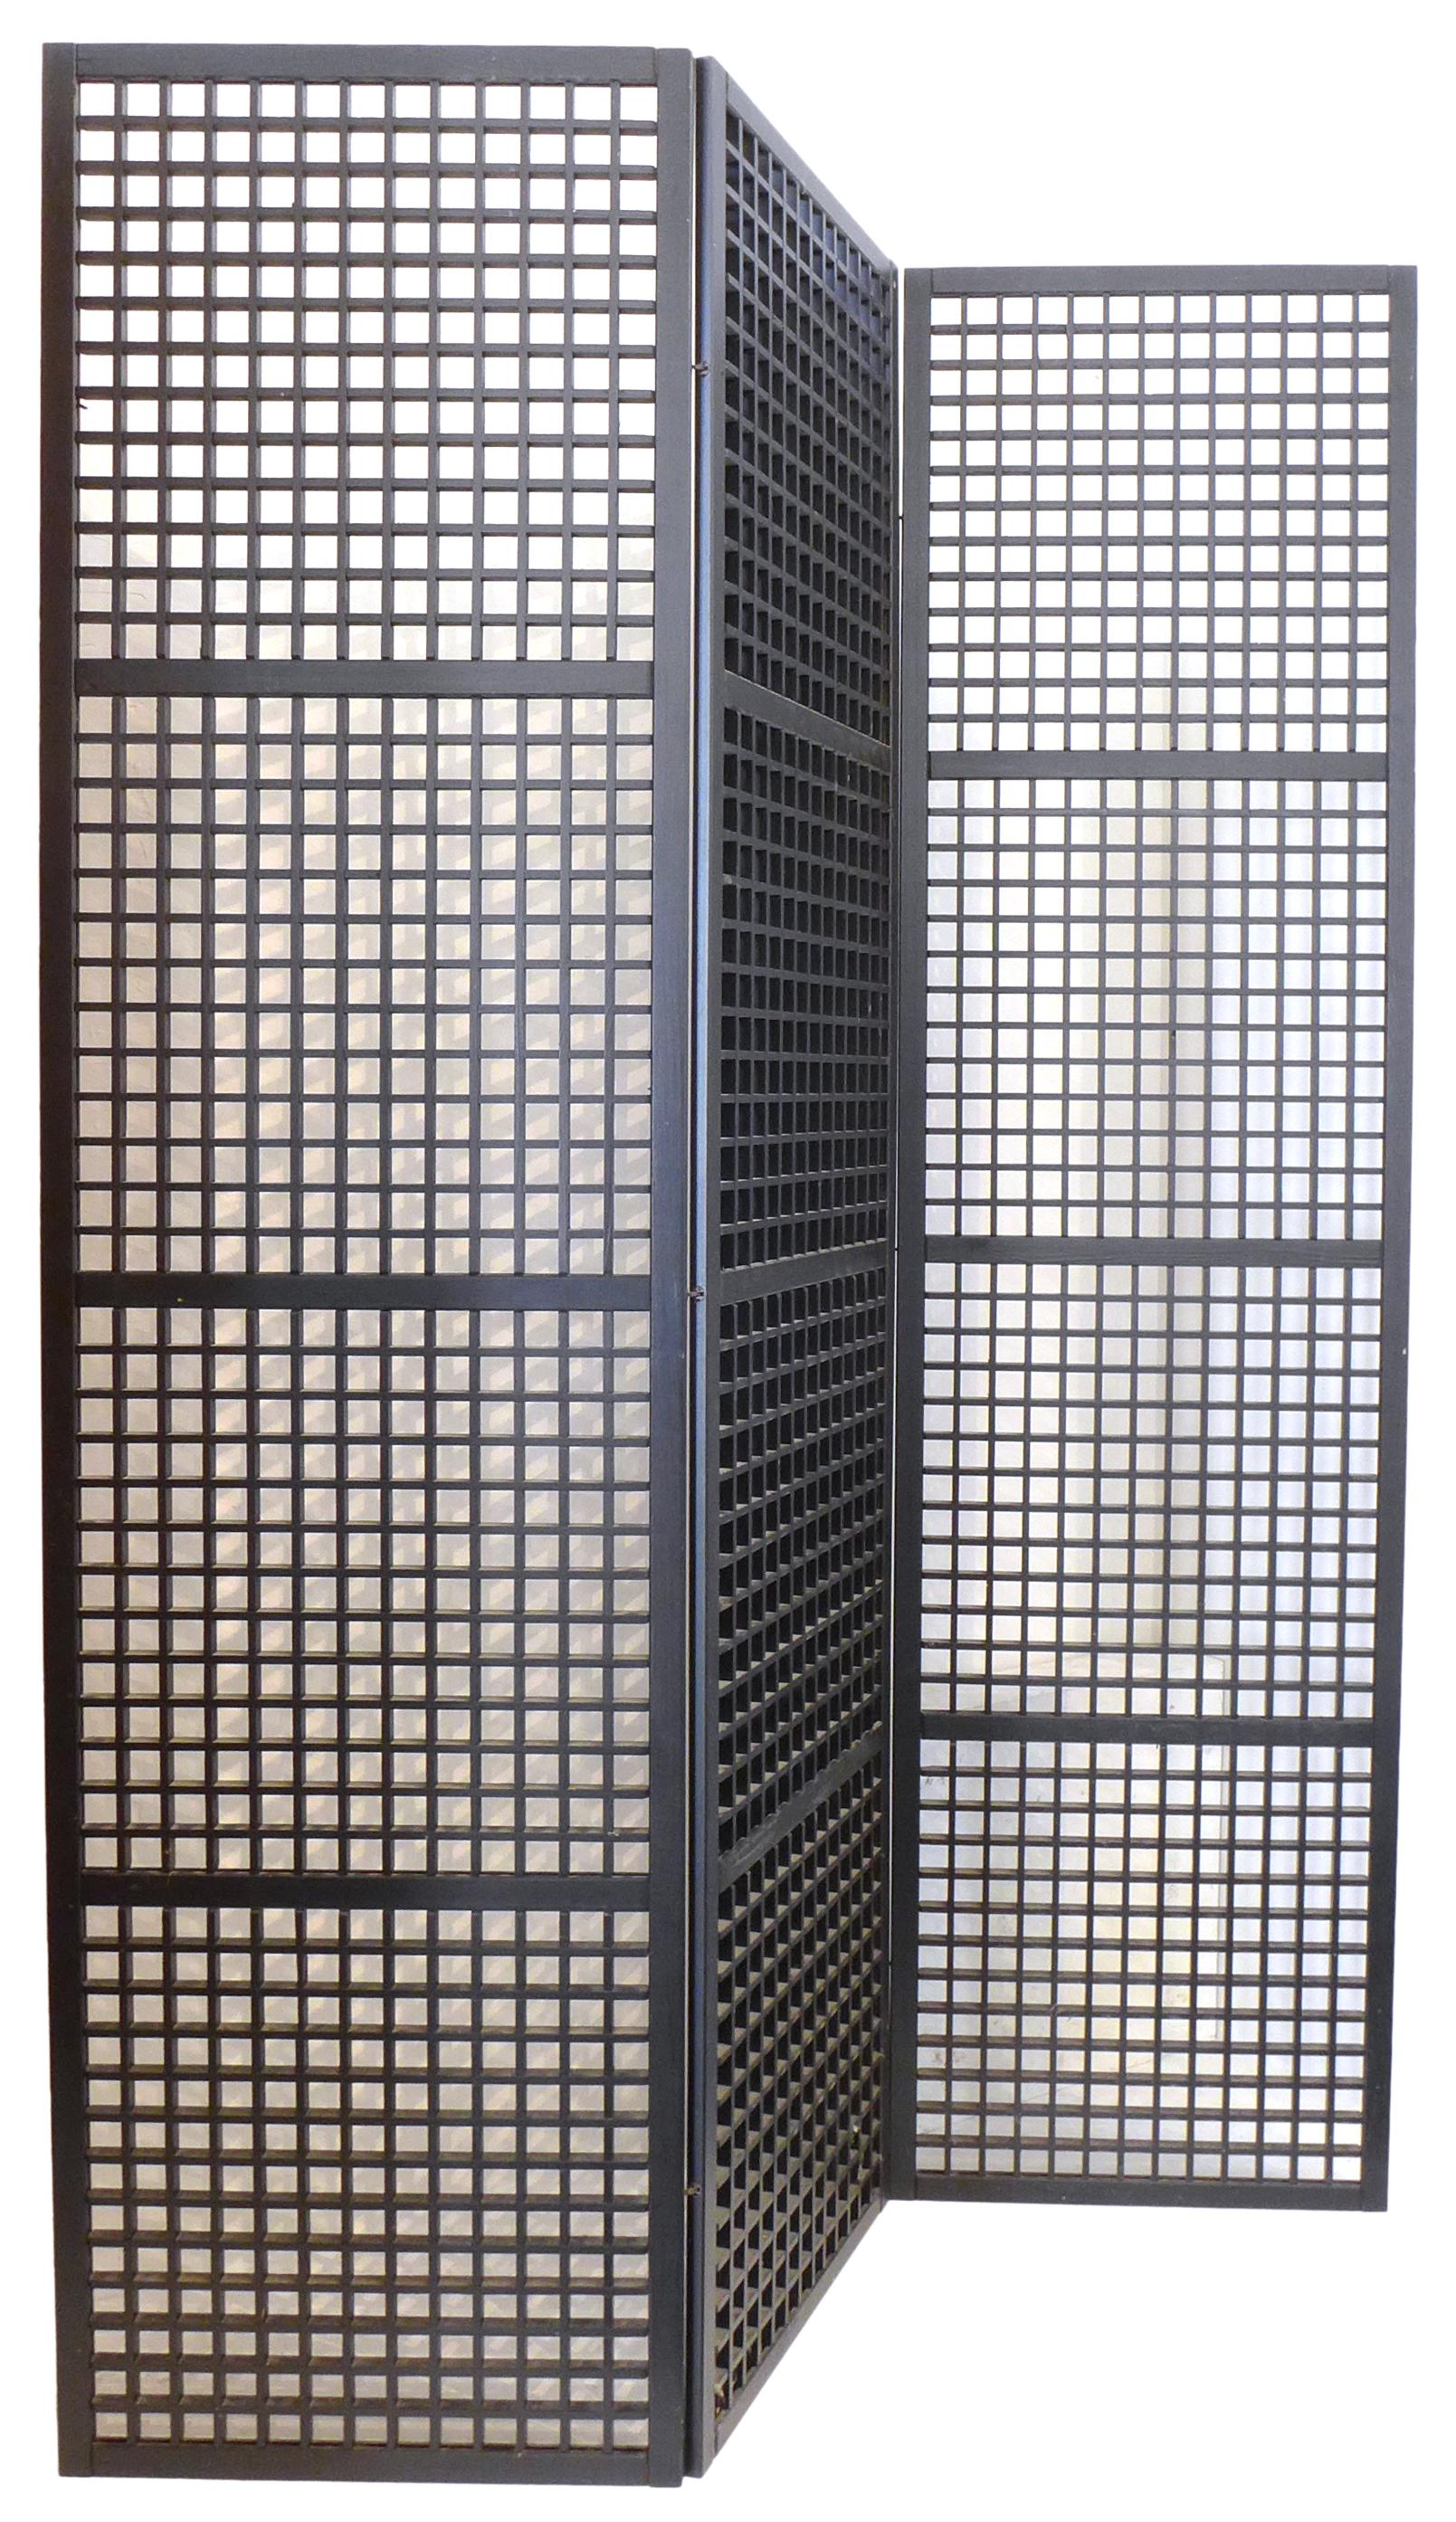 A wonderfully architectural and minimalist, Japanese lacquered, 3-panel screen/room divider. A tight grid, rectilinear cutout pattern references both the secessionist designs of Joseph Hoffman as well as the metalware designed by architect, Richard